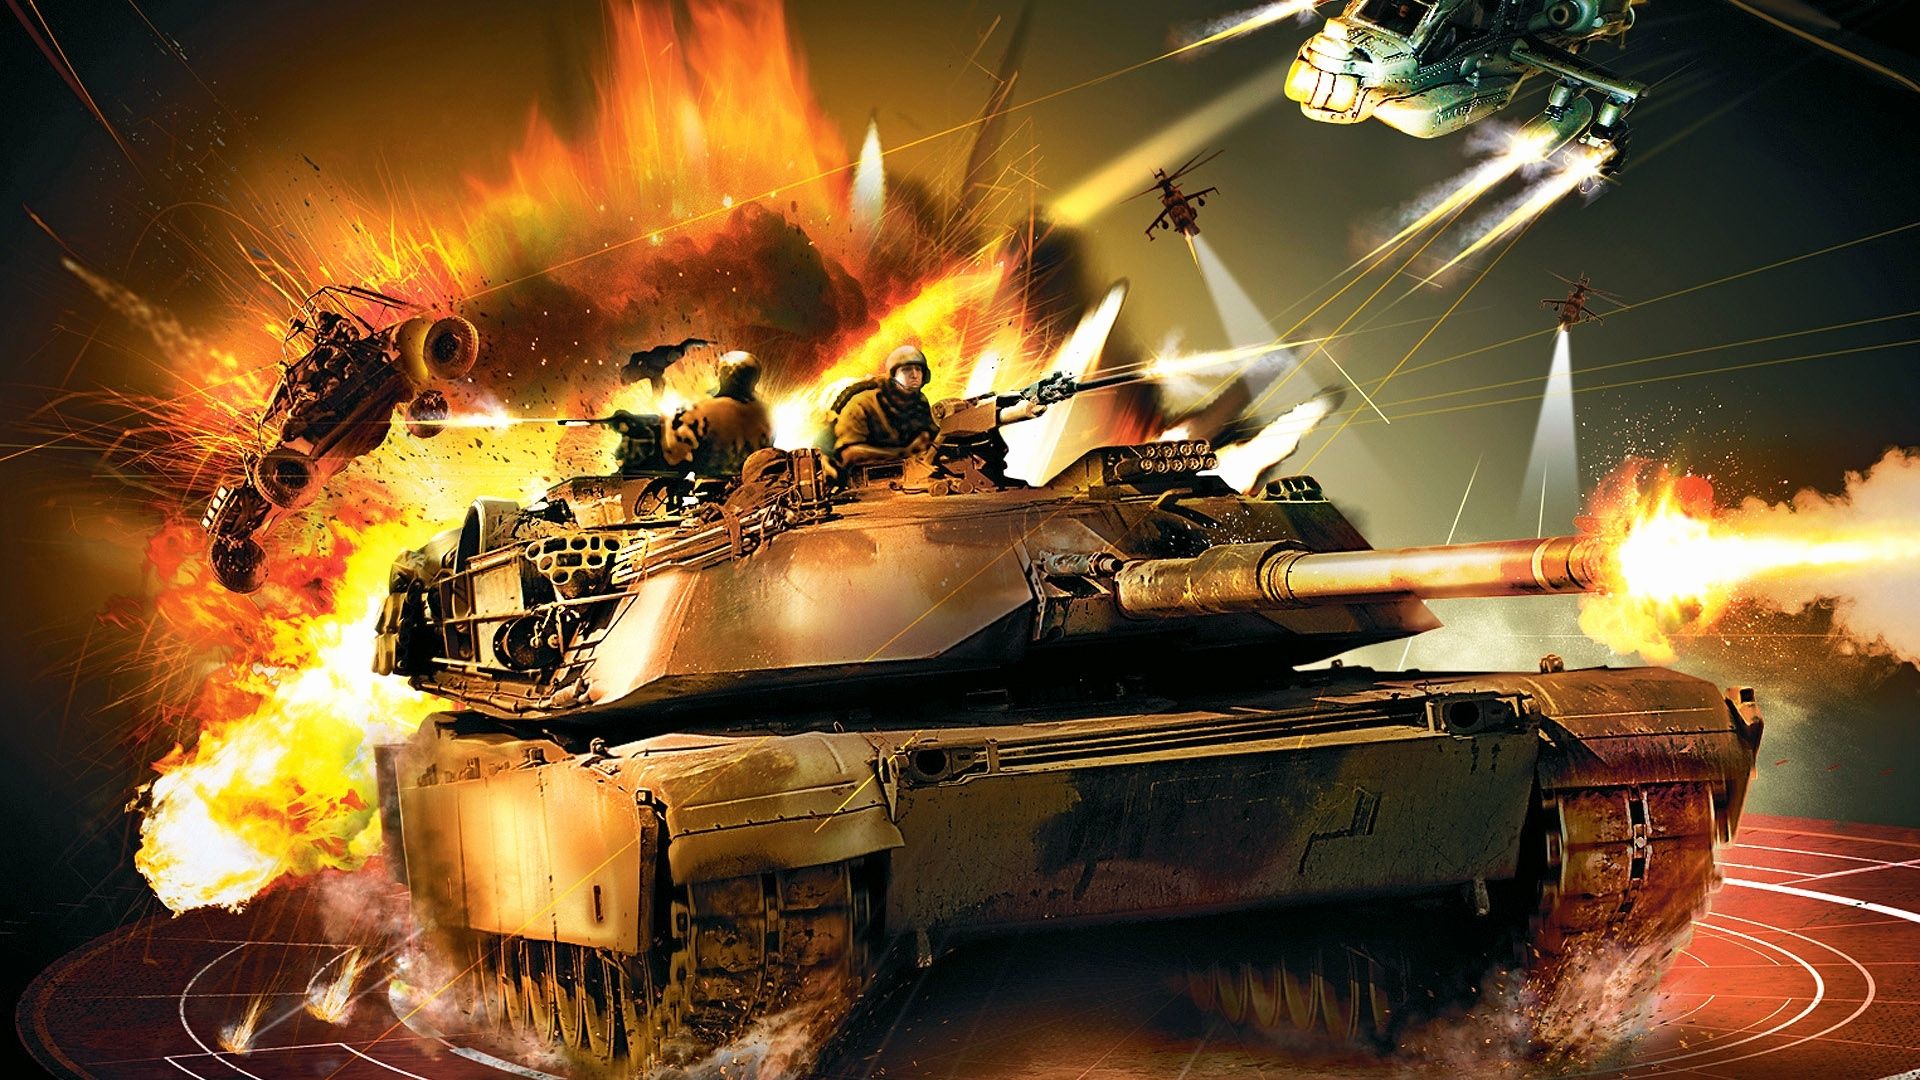 Tank Wallpaper New Army Tank Wallpaper In HD for Free Download for You of The Hudson